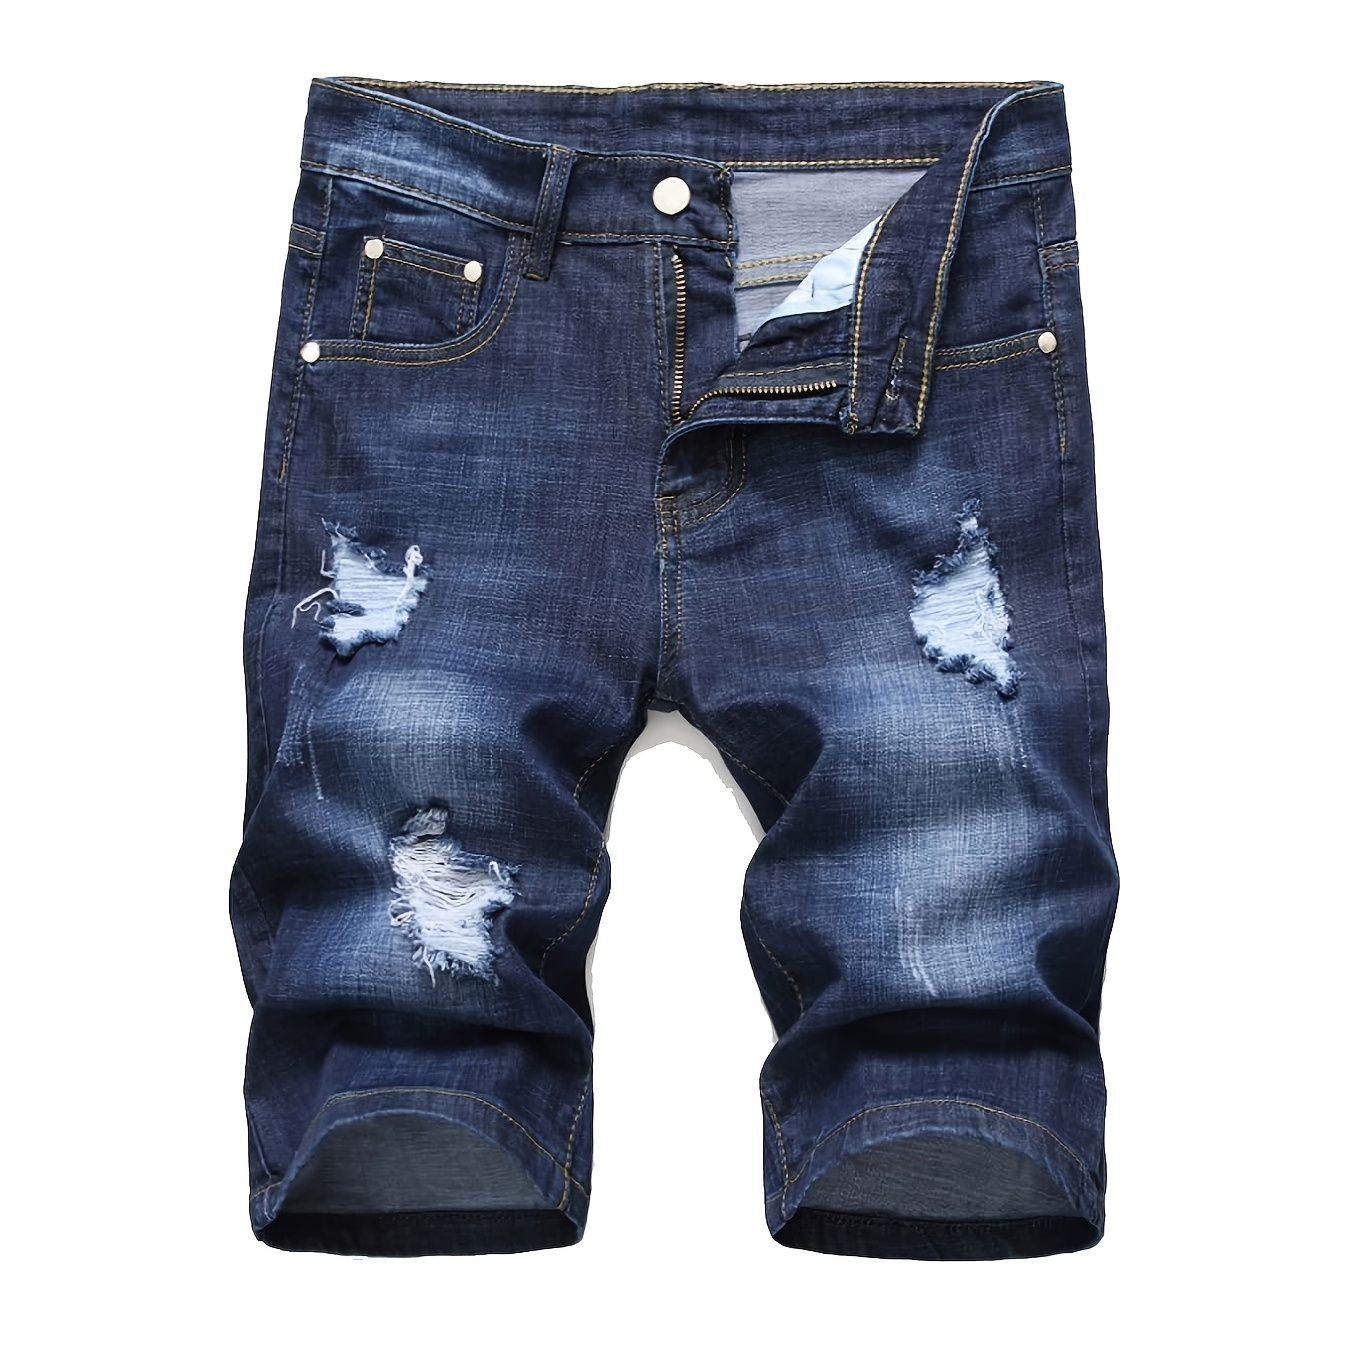 Men's Ripped Shorts Broken Hole Distressed Denim Jean - Clothing, Shoes ...